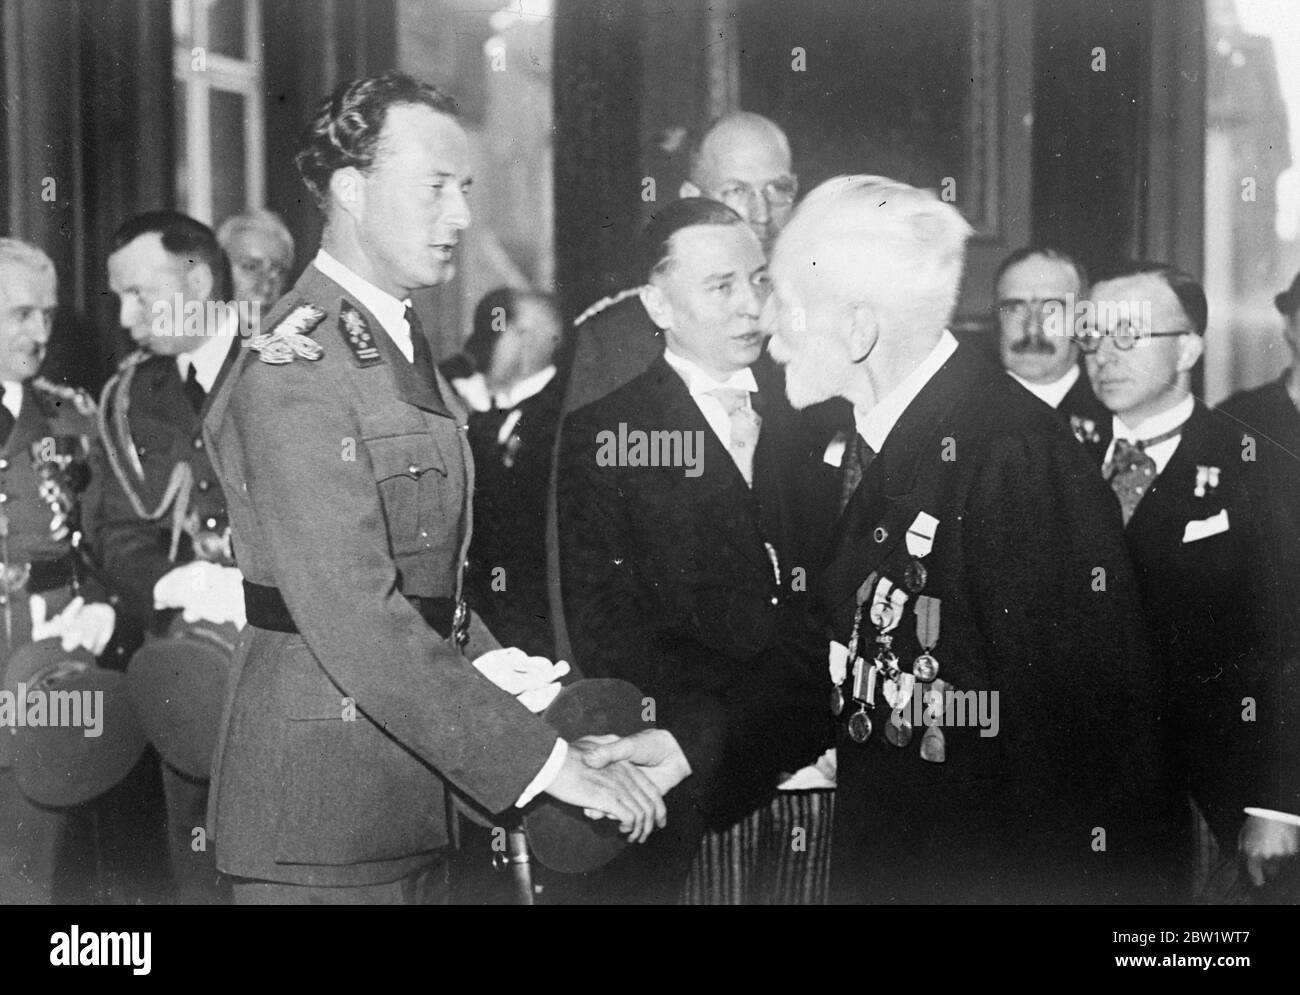 King Leopold greets man who escaped war sentence of death at Nurse Cavell Memorial service. In the room of the Senate in Brussels where Nurse Cavell and 35 Belgians were condemned to death in 1915 for helping refugee soldiers, King Leopold attended a ceremony in their memory. Photo shows, King Leopold shaking hands with a man he was condemned to death by the Germans, but escaped, at the Memorial service in Brussels. 19 April 1937 Stock Photo